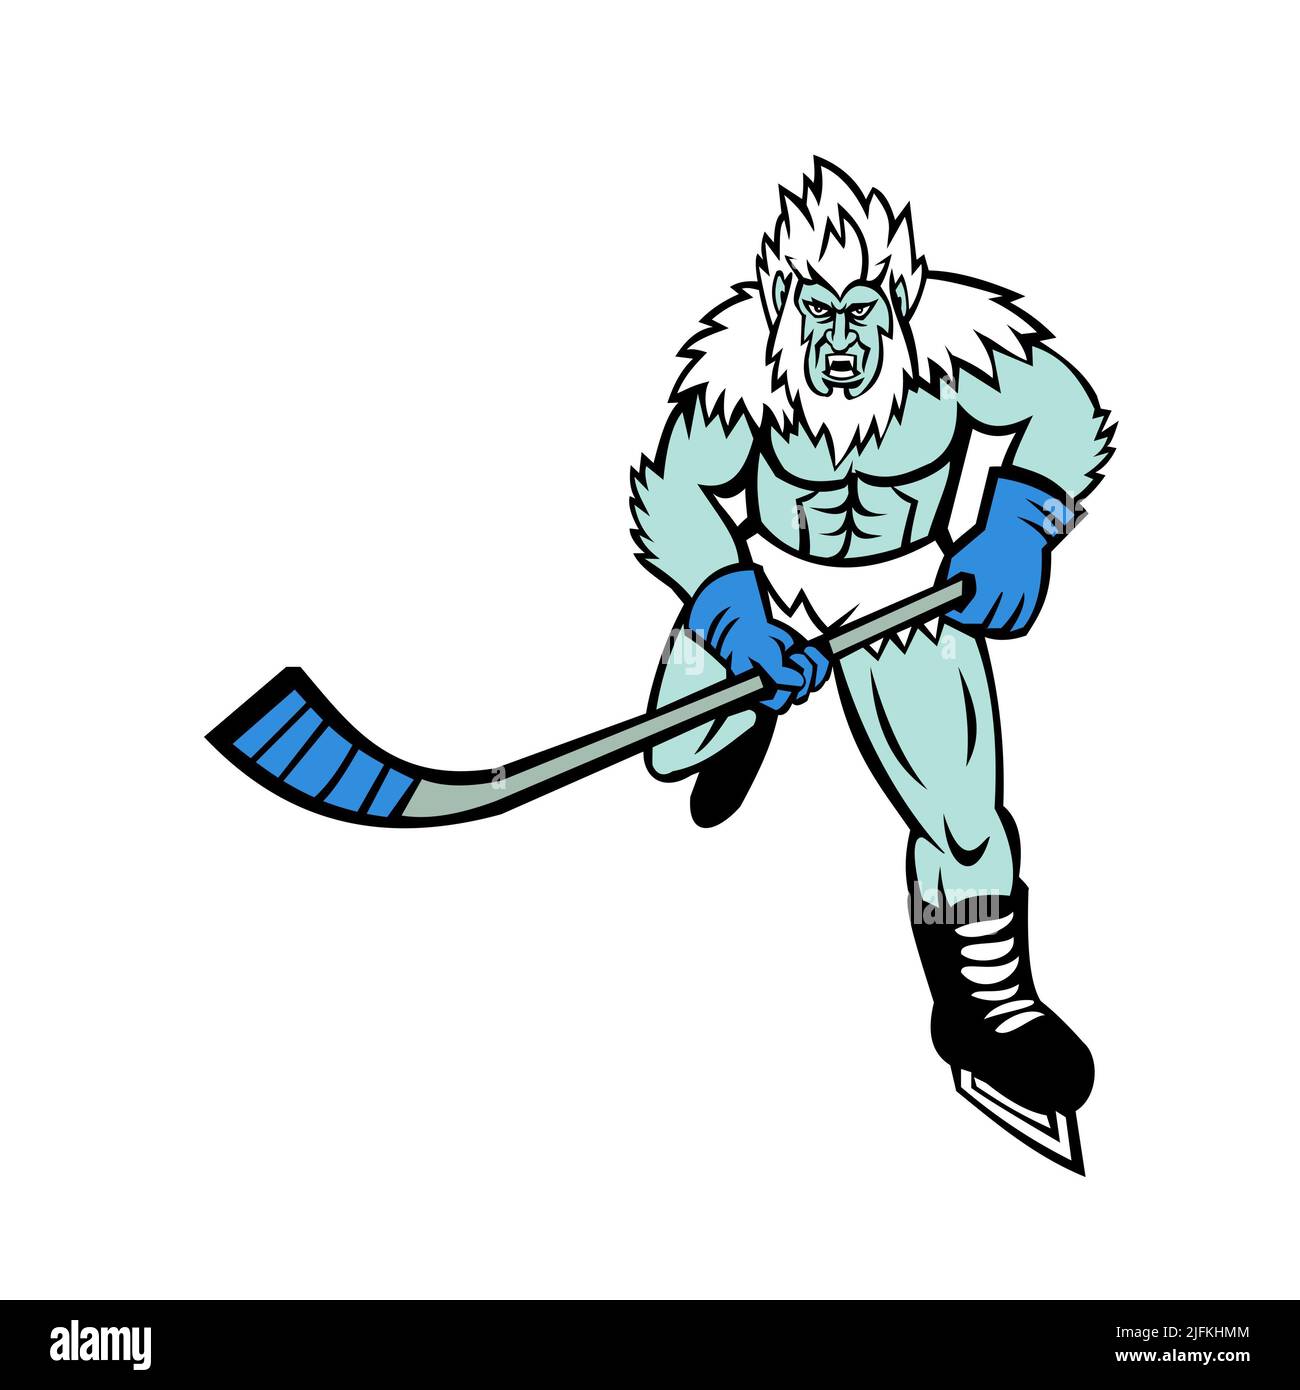 Mascot icon illustration of an angry Yeti or Abominable Snowman, a folkloric ape-like creature, with hockey stick playing ice hockey viewed from Stock Photo